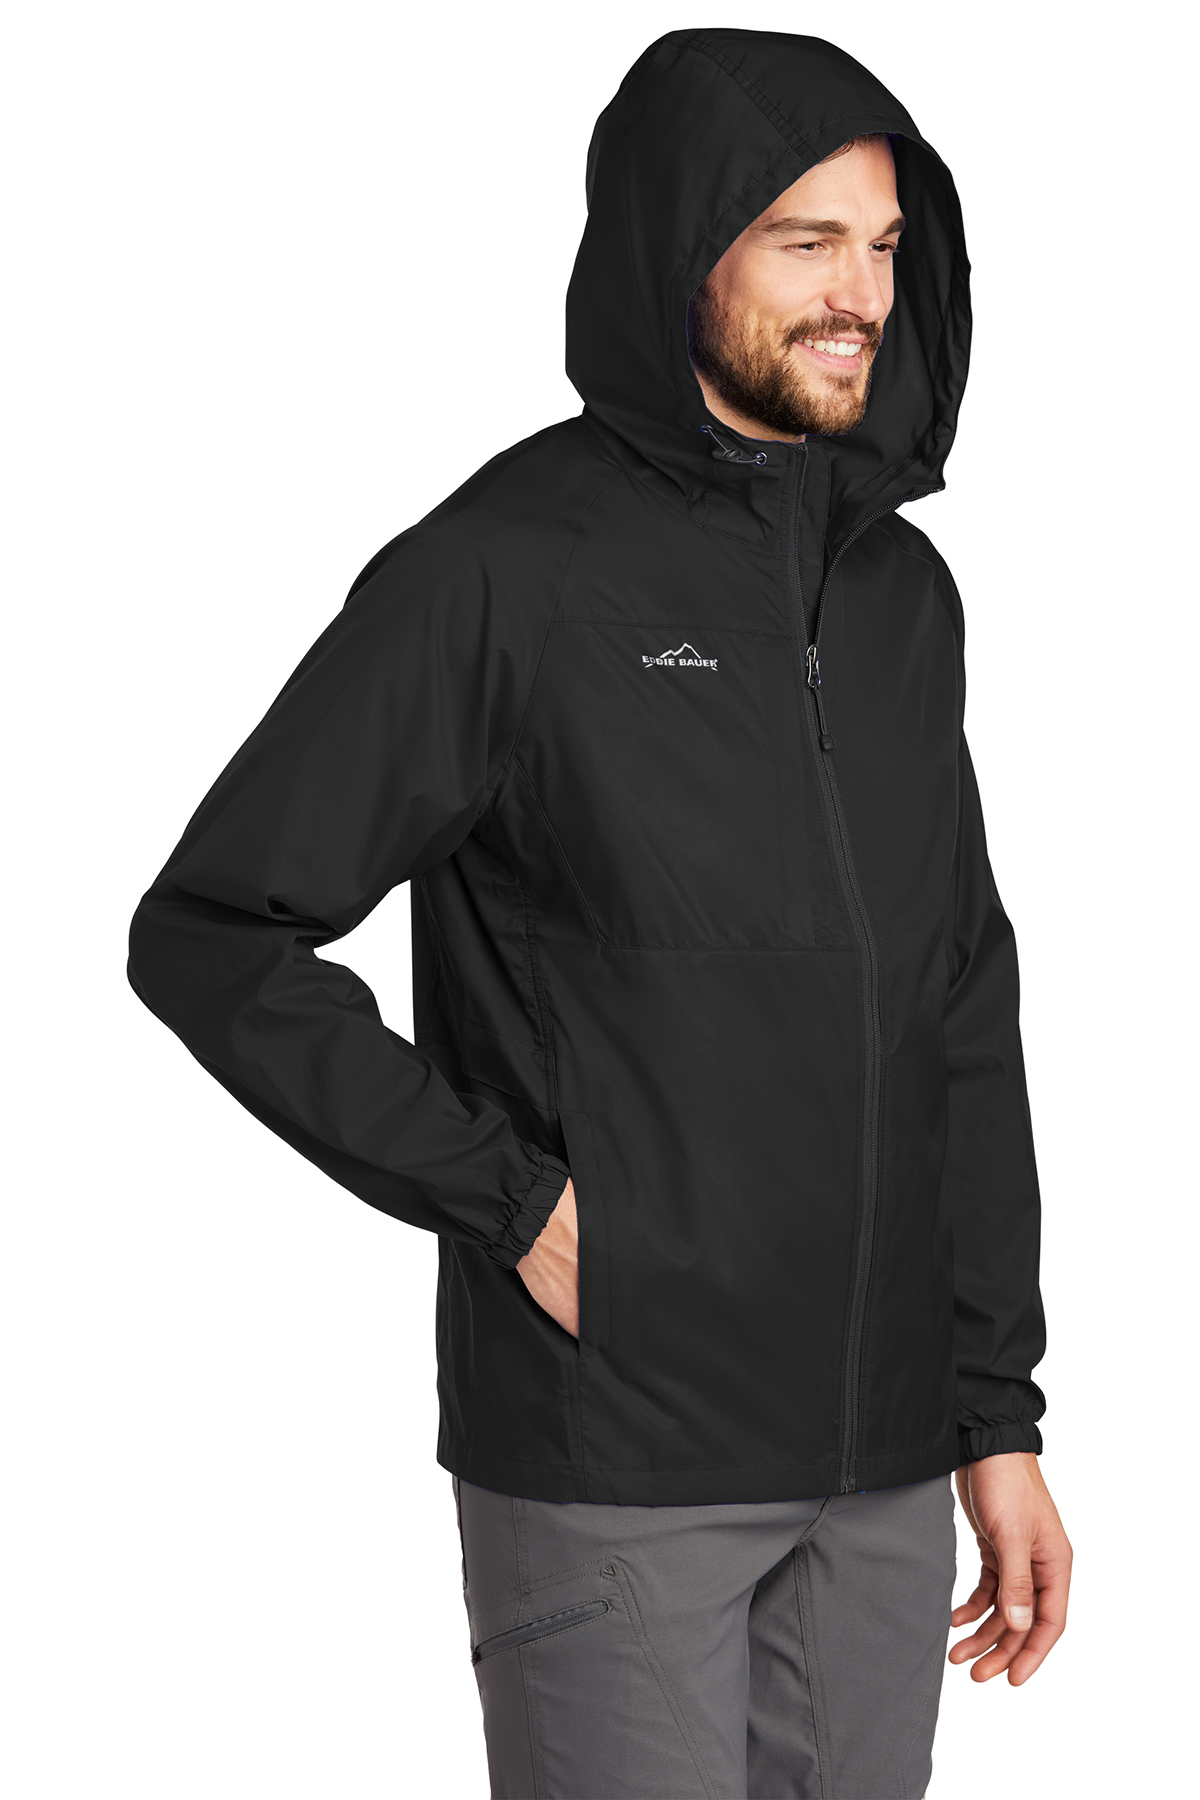 Eddie Bauer - Packable Wind Jacket | Product | Company Casuals